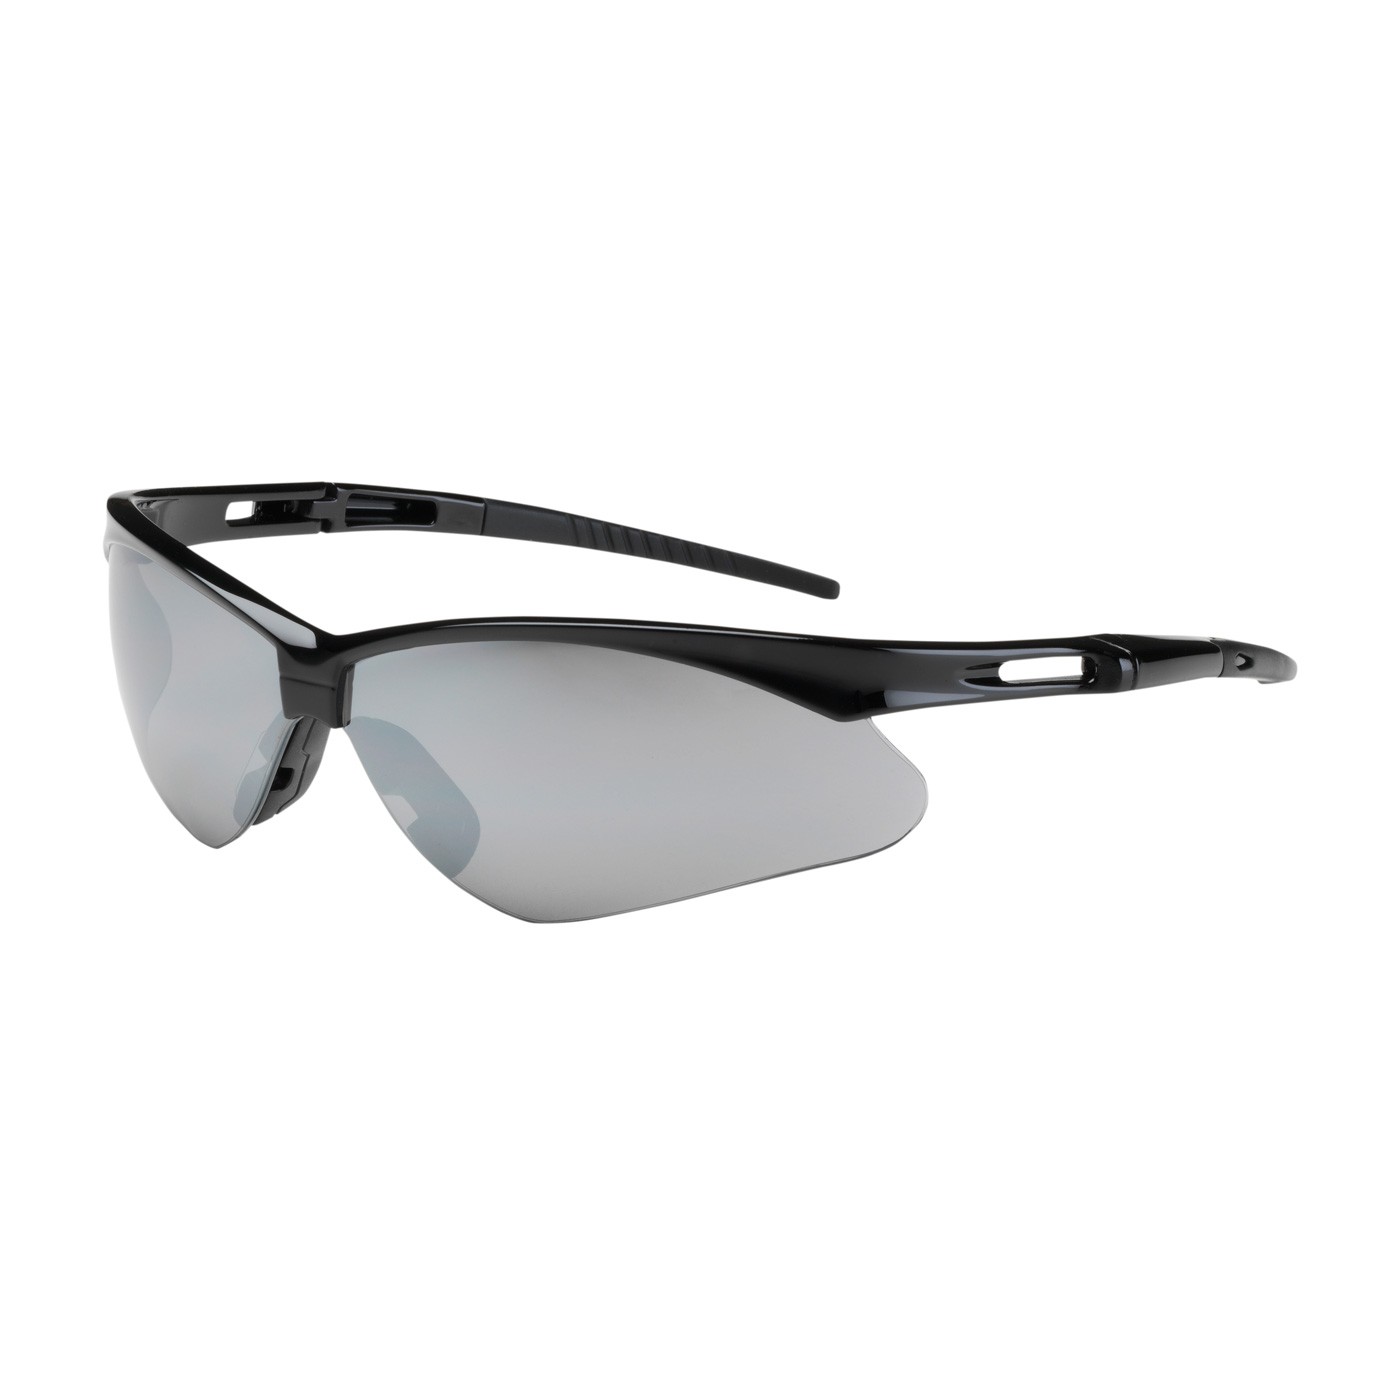 Anser™ Semi-Rimless Safety Glasses with Black Frame, Silver Mirror Lens and Anti-Scratch Coating  (#250-AN-10125)